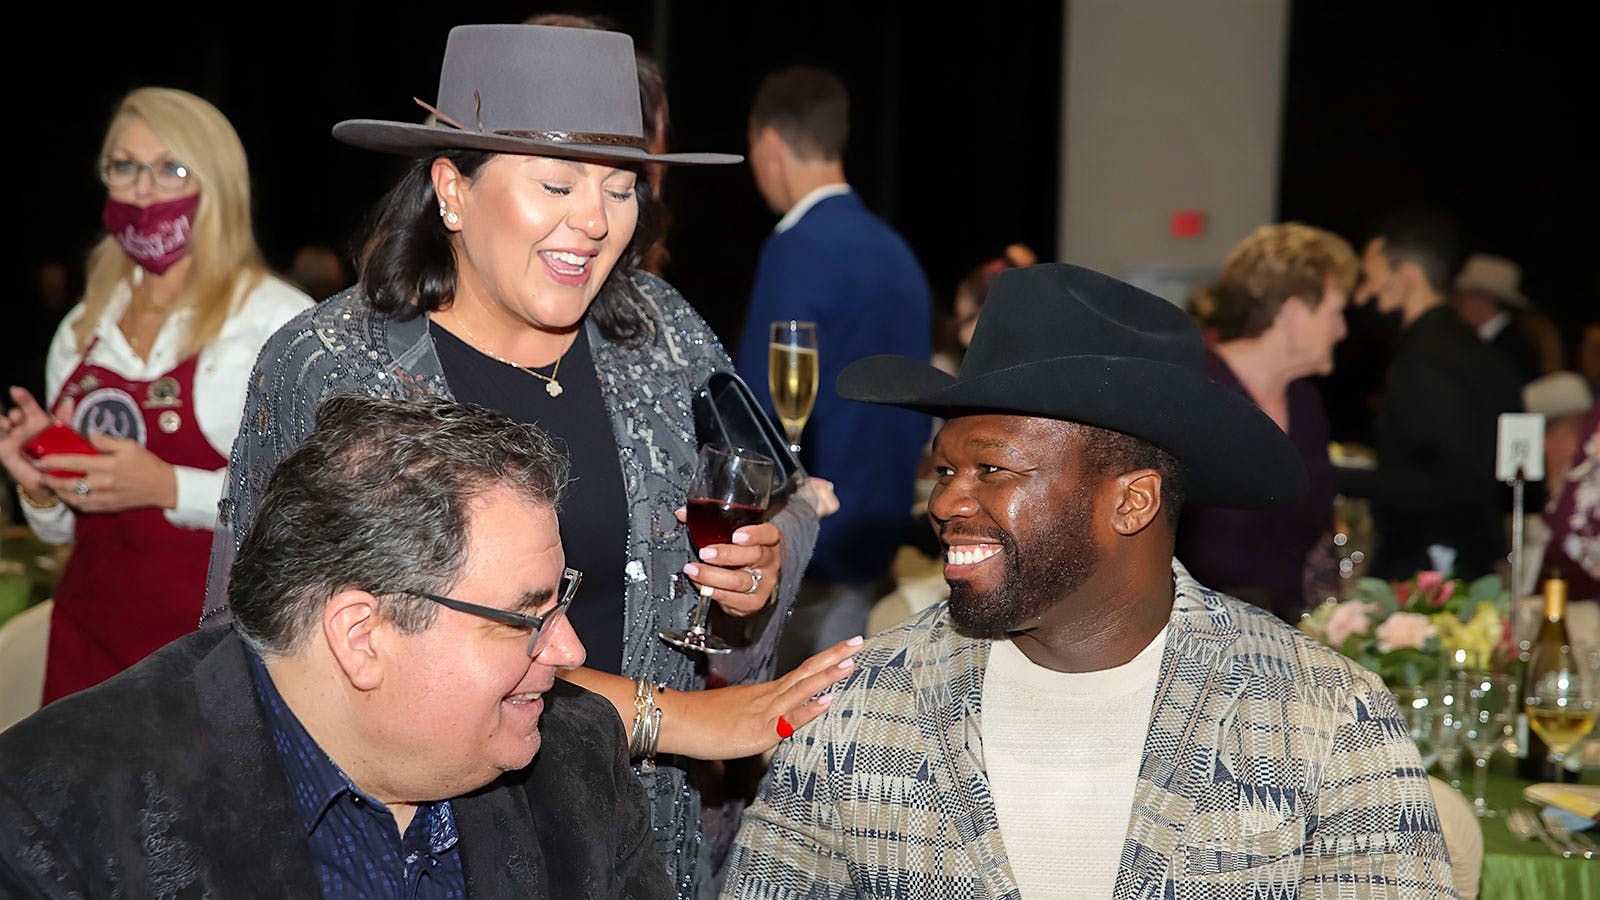 Charity Wine Auctions Raise Millions for Animal Rescue and Texas Kids